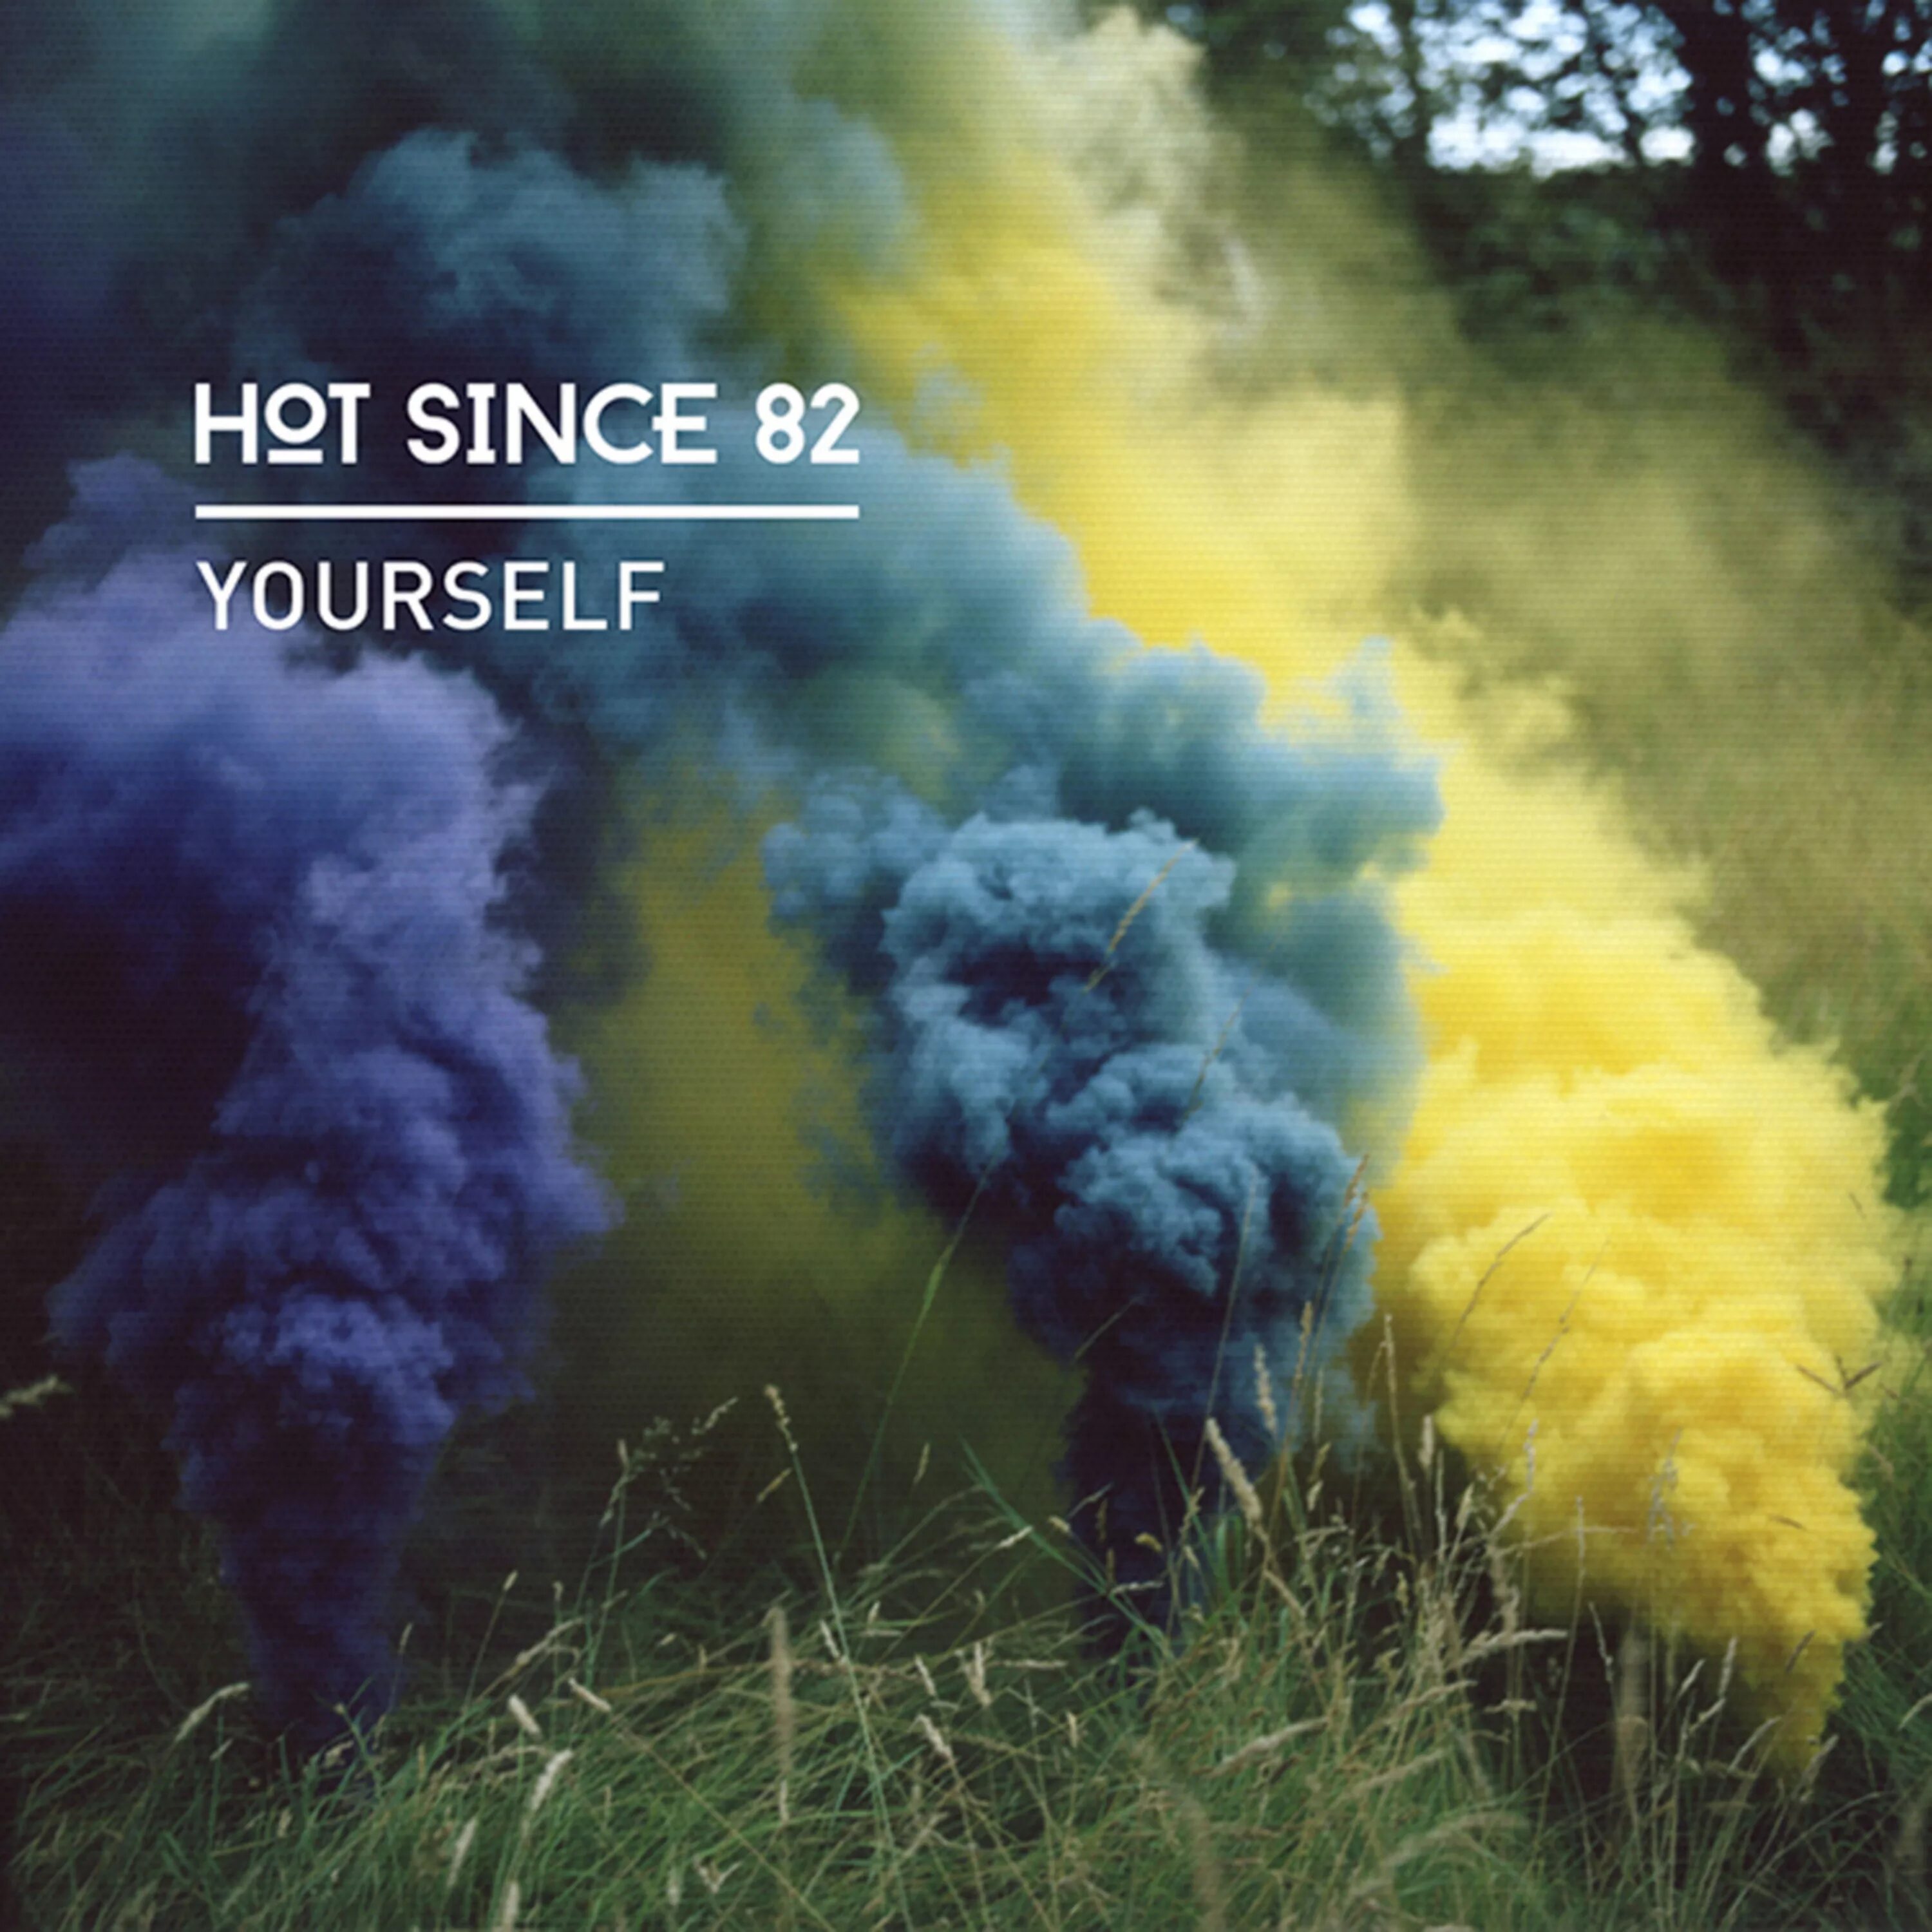 Hot since 82. Buy yourself песня. Therapy hot since 82 feat. Alex. Hot since 82 Cecrle.